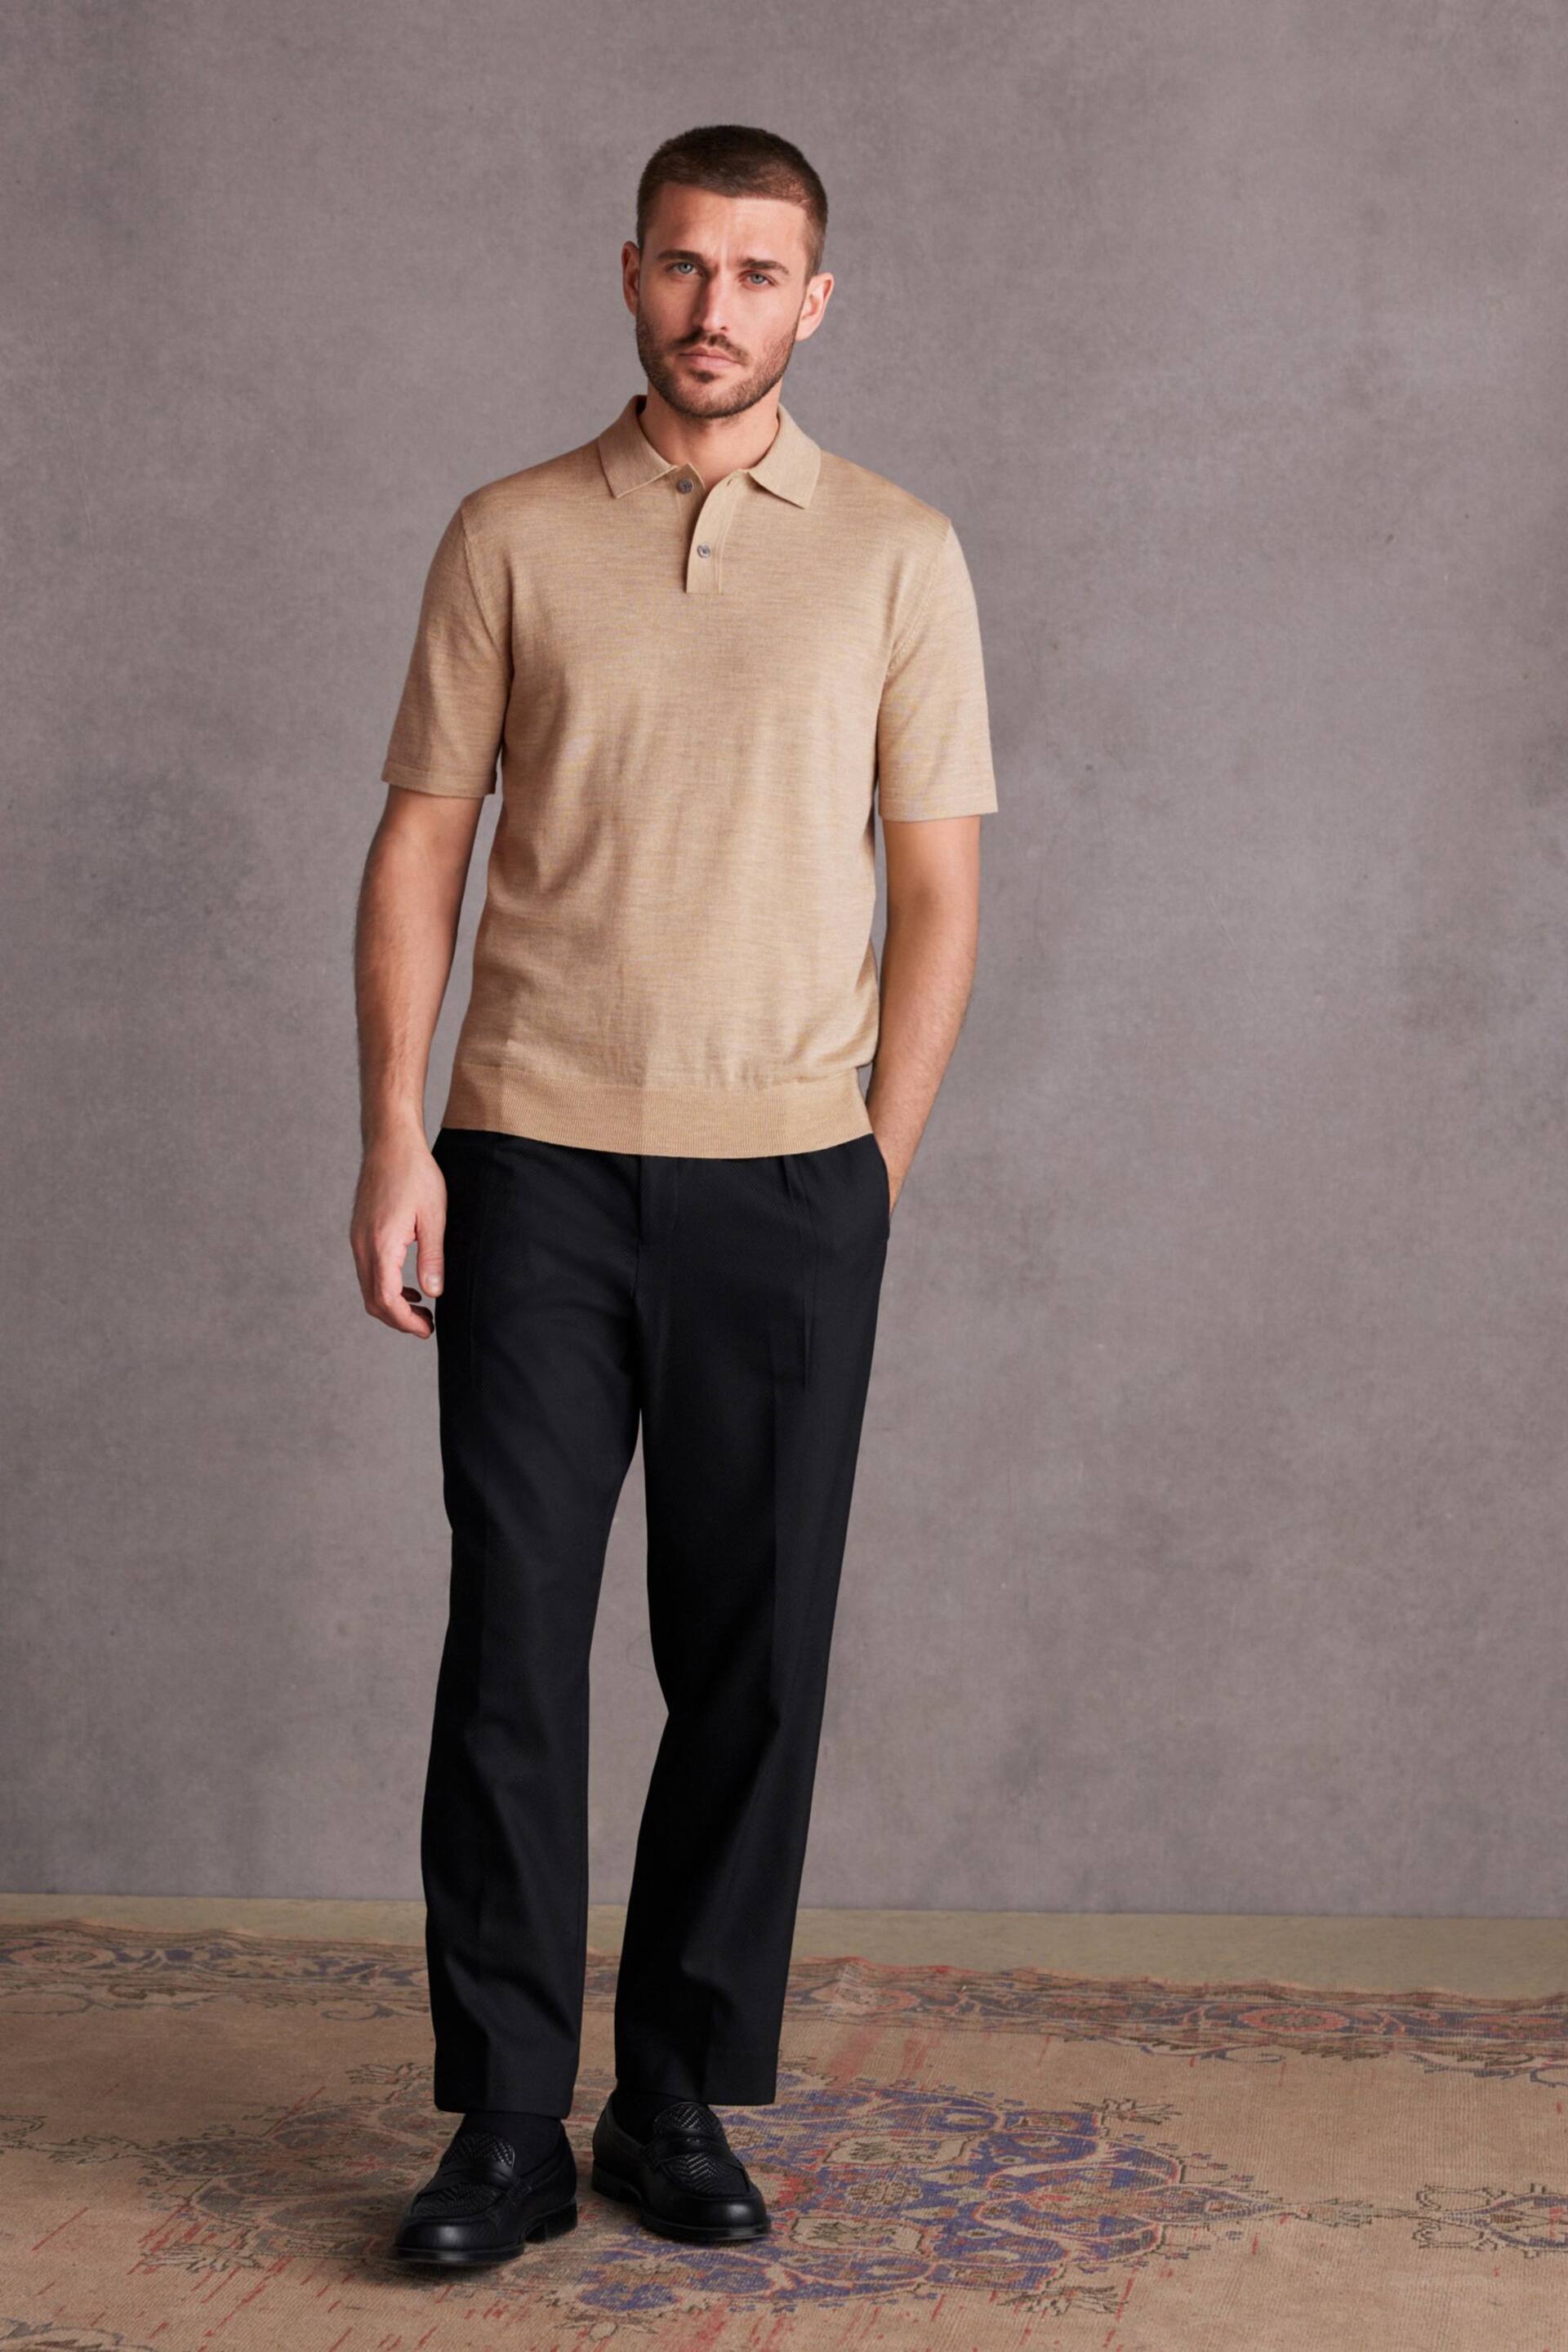 Neutral Knitted Premium Merino Wool Regular Fit Polo Shirt - Image 2 of 6